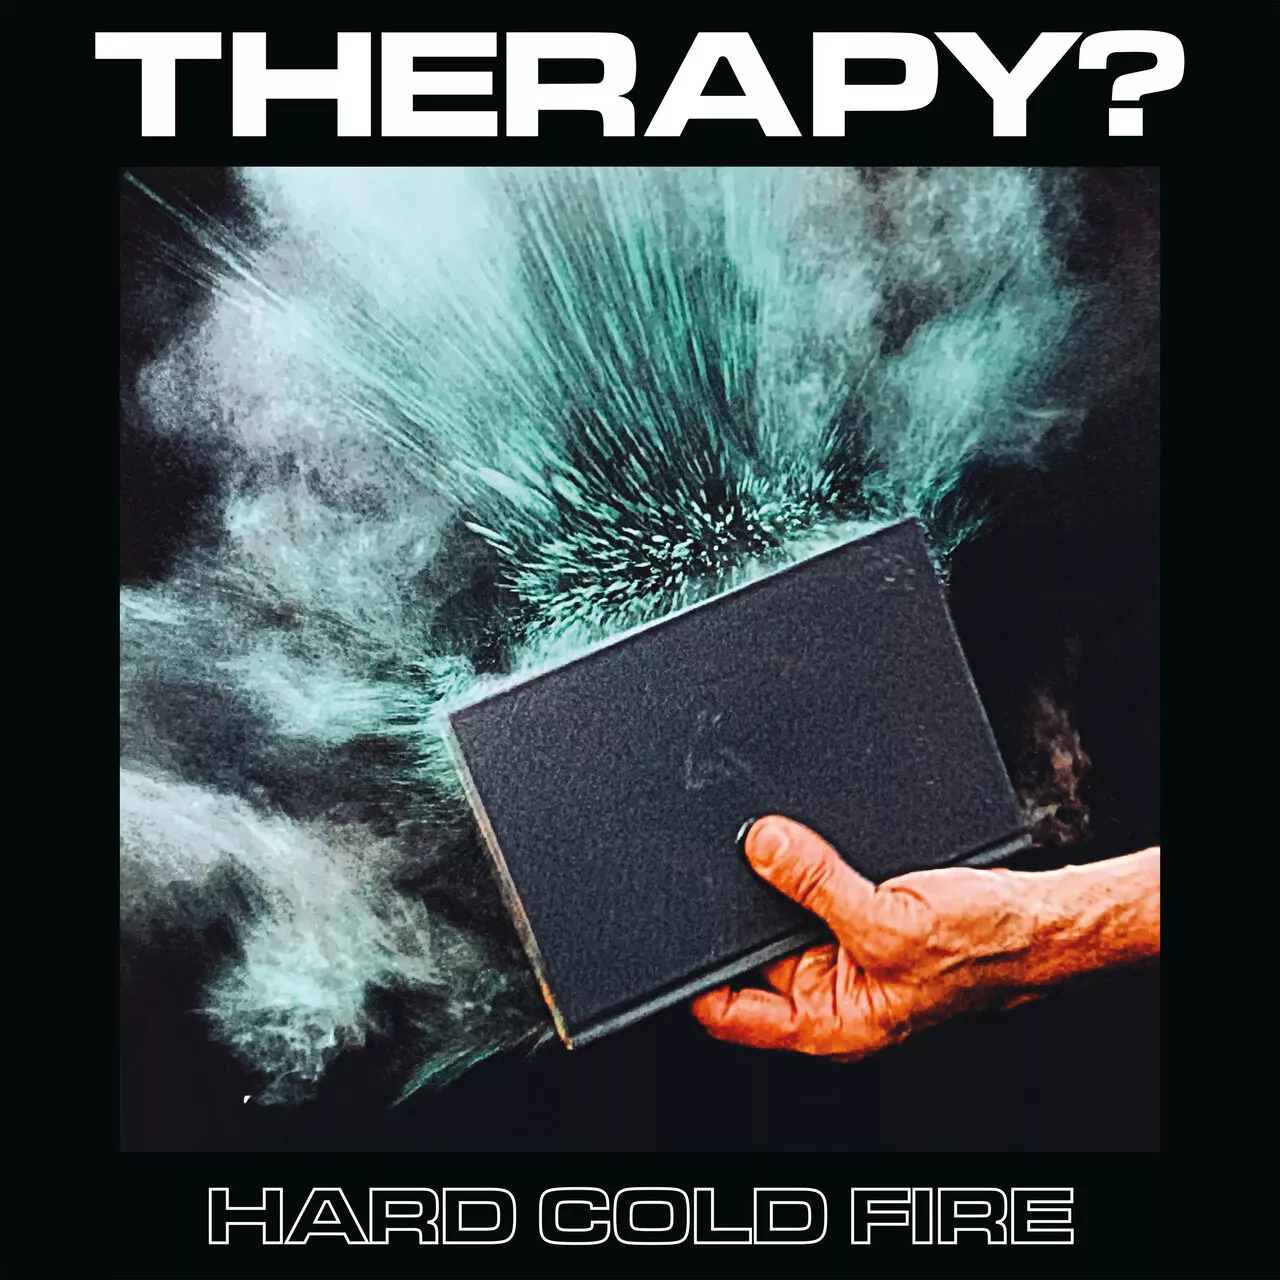 Hard Cold Fire - Therapy?